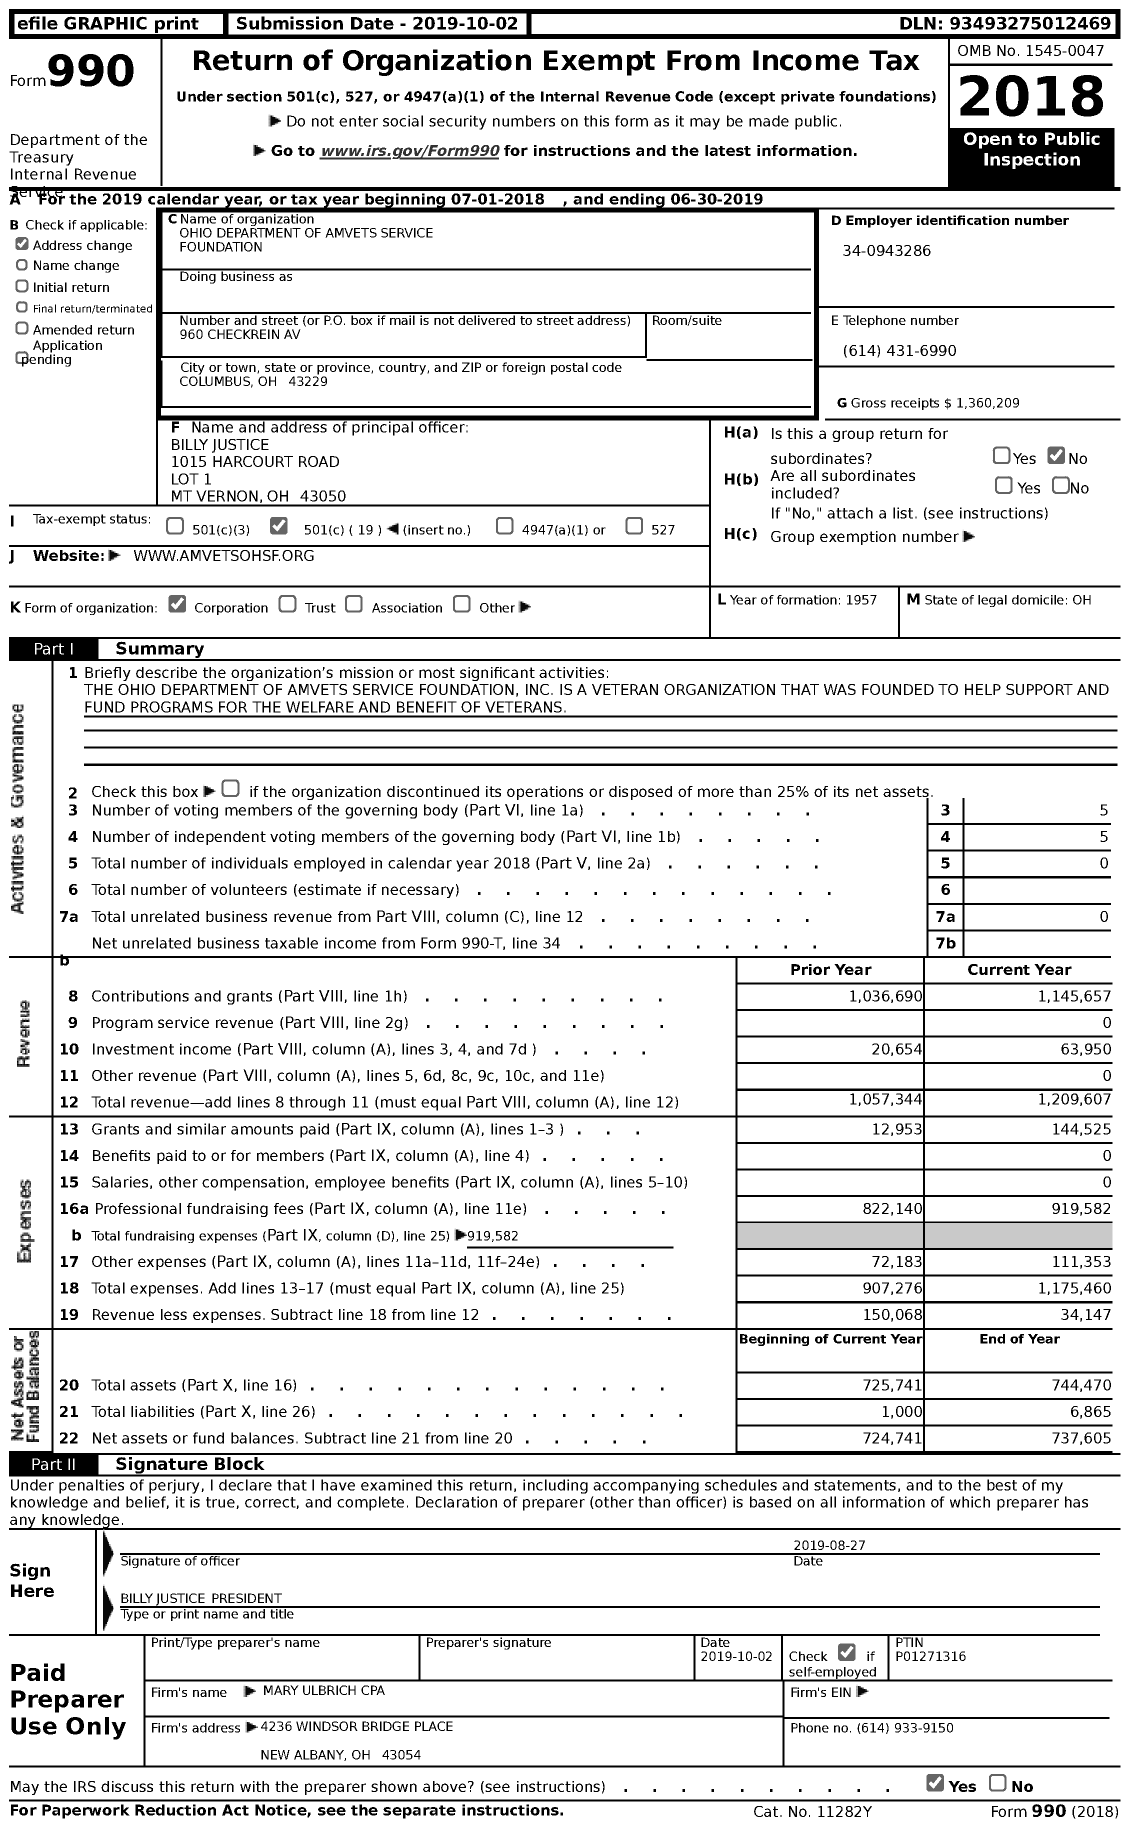 Image of first page of 2018 Form 990 for Ohio Department of Amvets Service Foundation